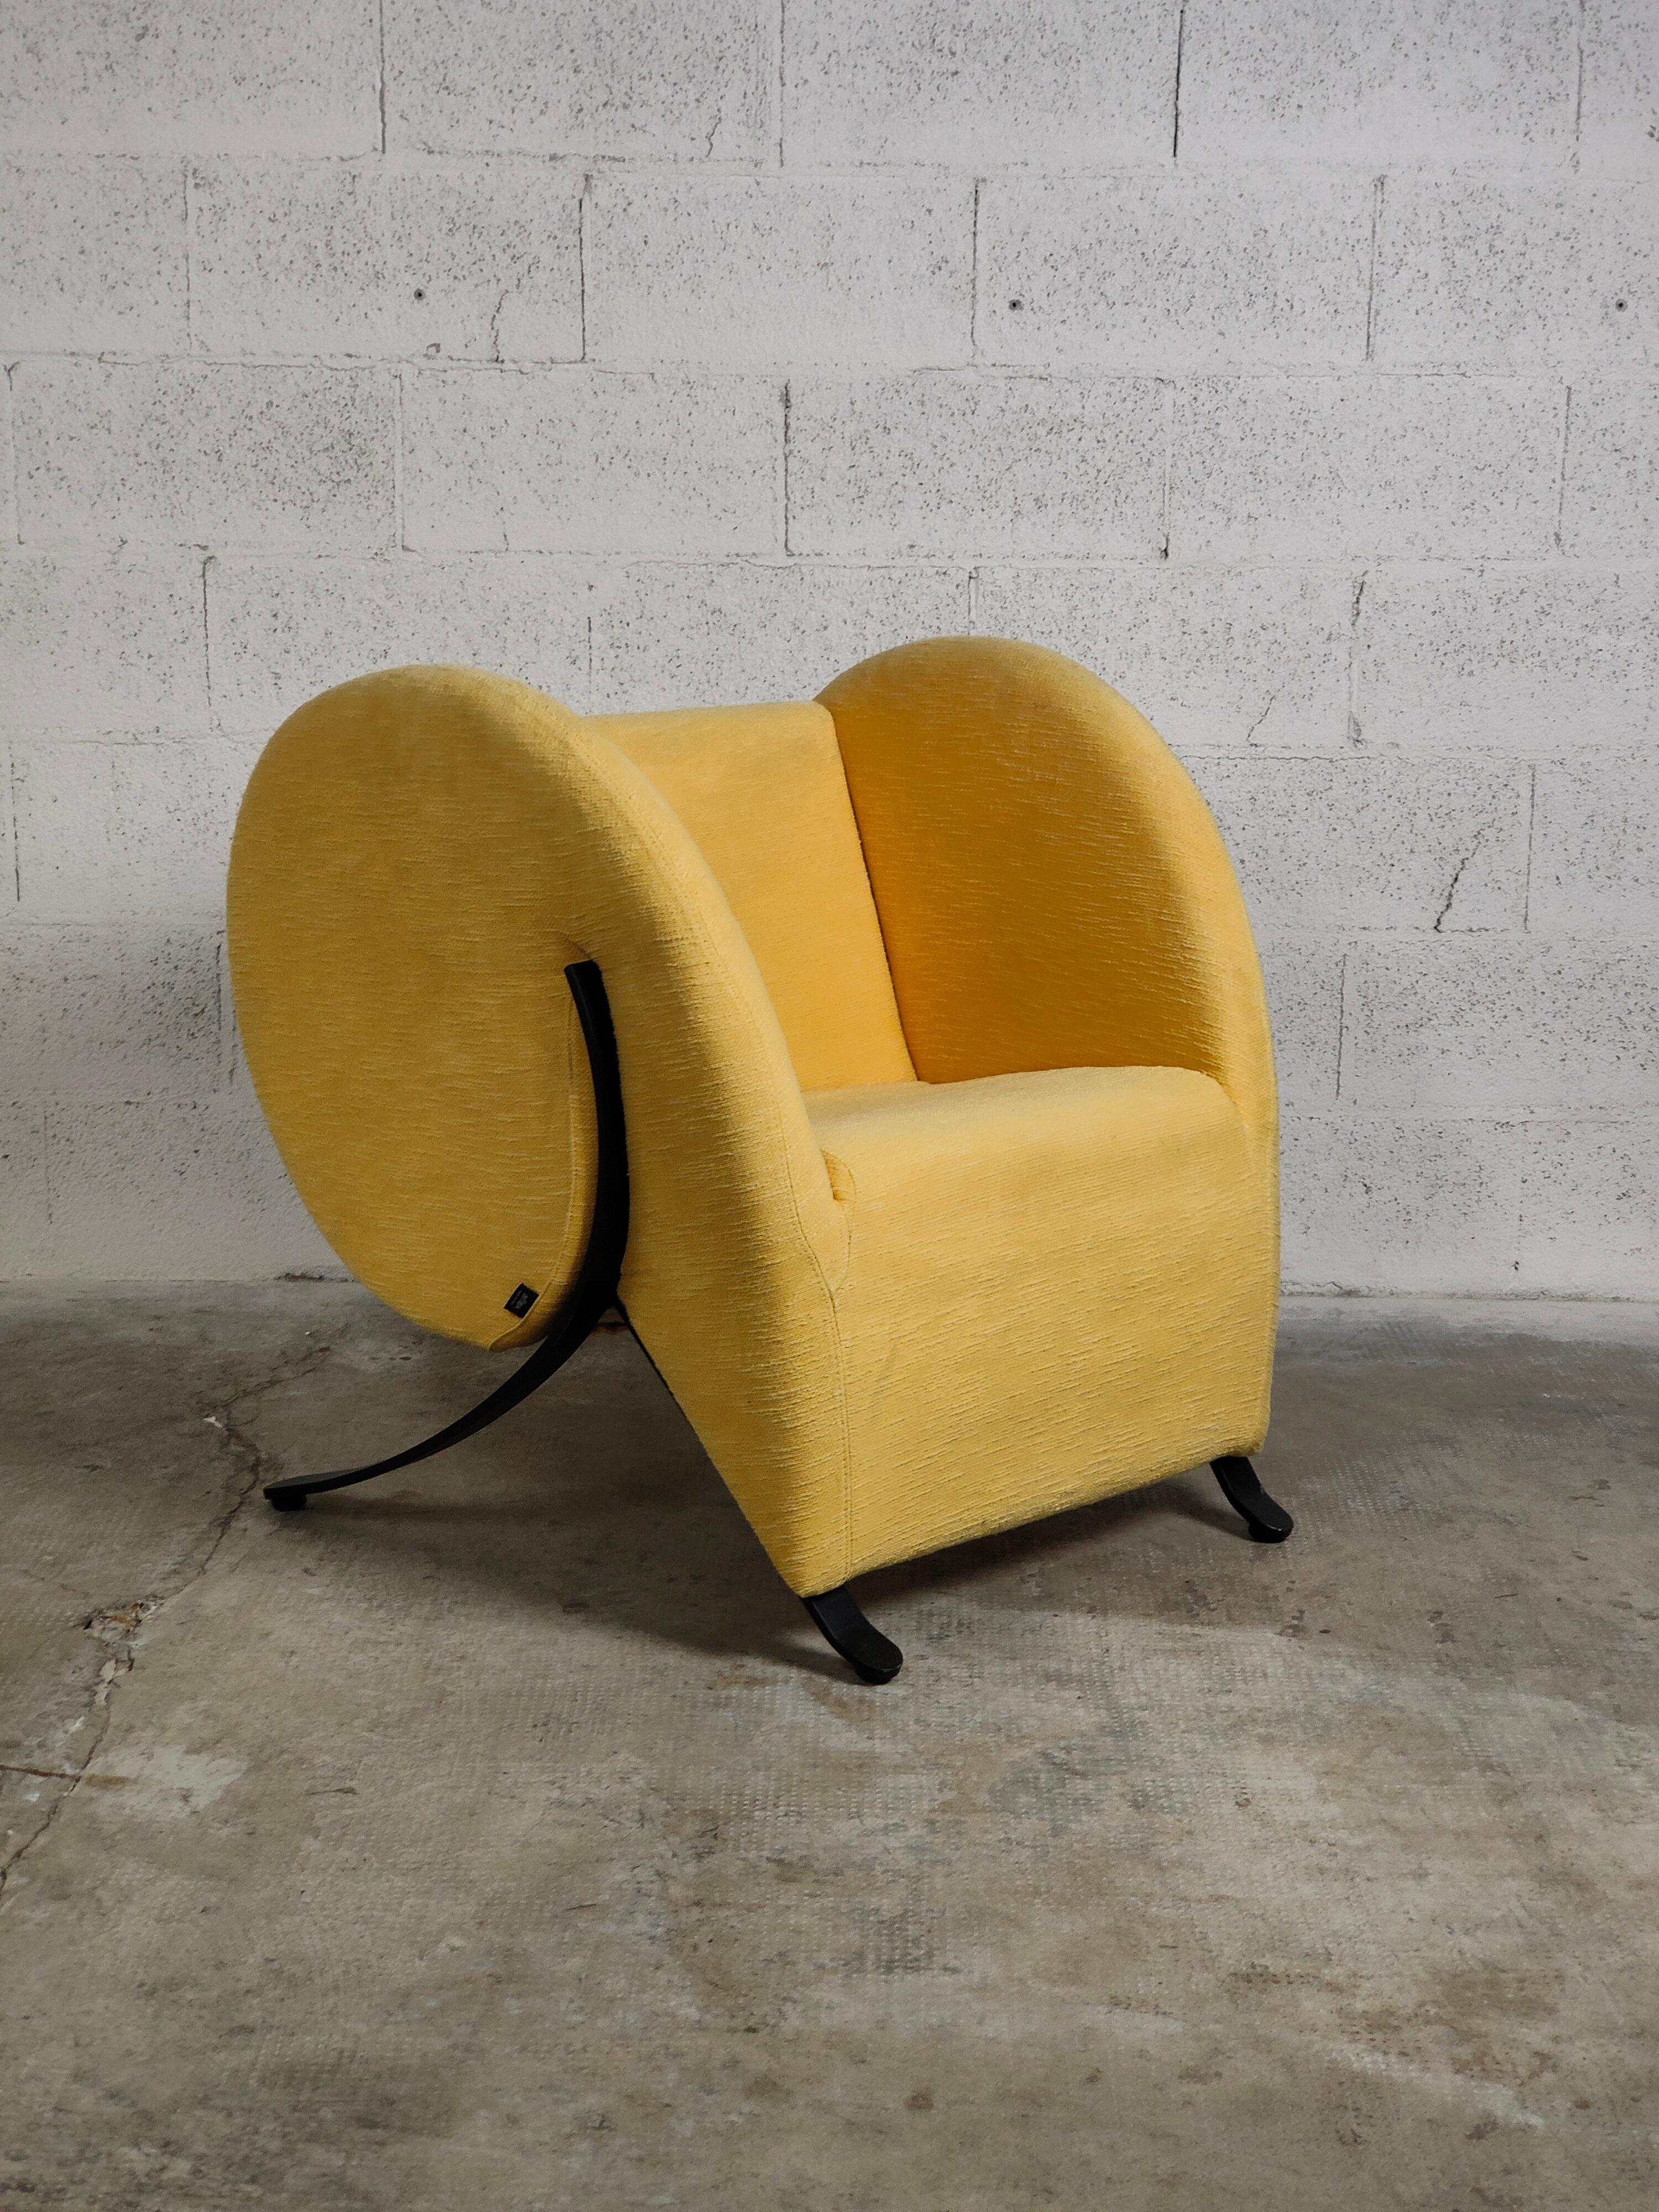 The Virgola armchair, designed by Yaakov Kaufman for Arflex, has a steel frame with molded polyurethane padding and polyester fiber, springing on elastic straps, legs in aluminum or black painted steel and removable cover in fabric or fixed in